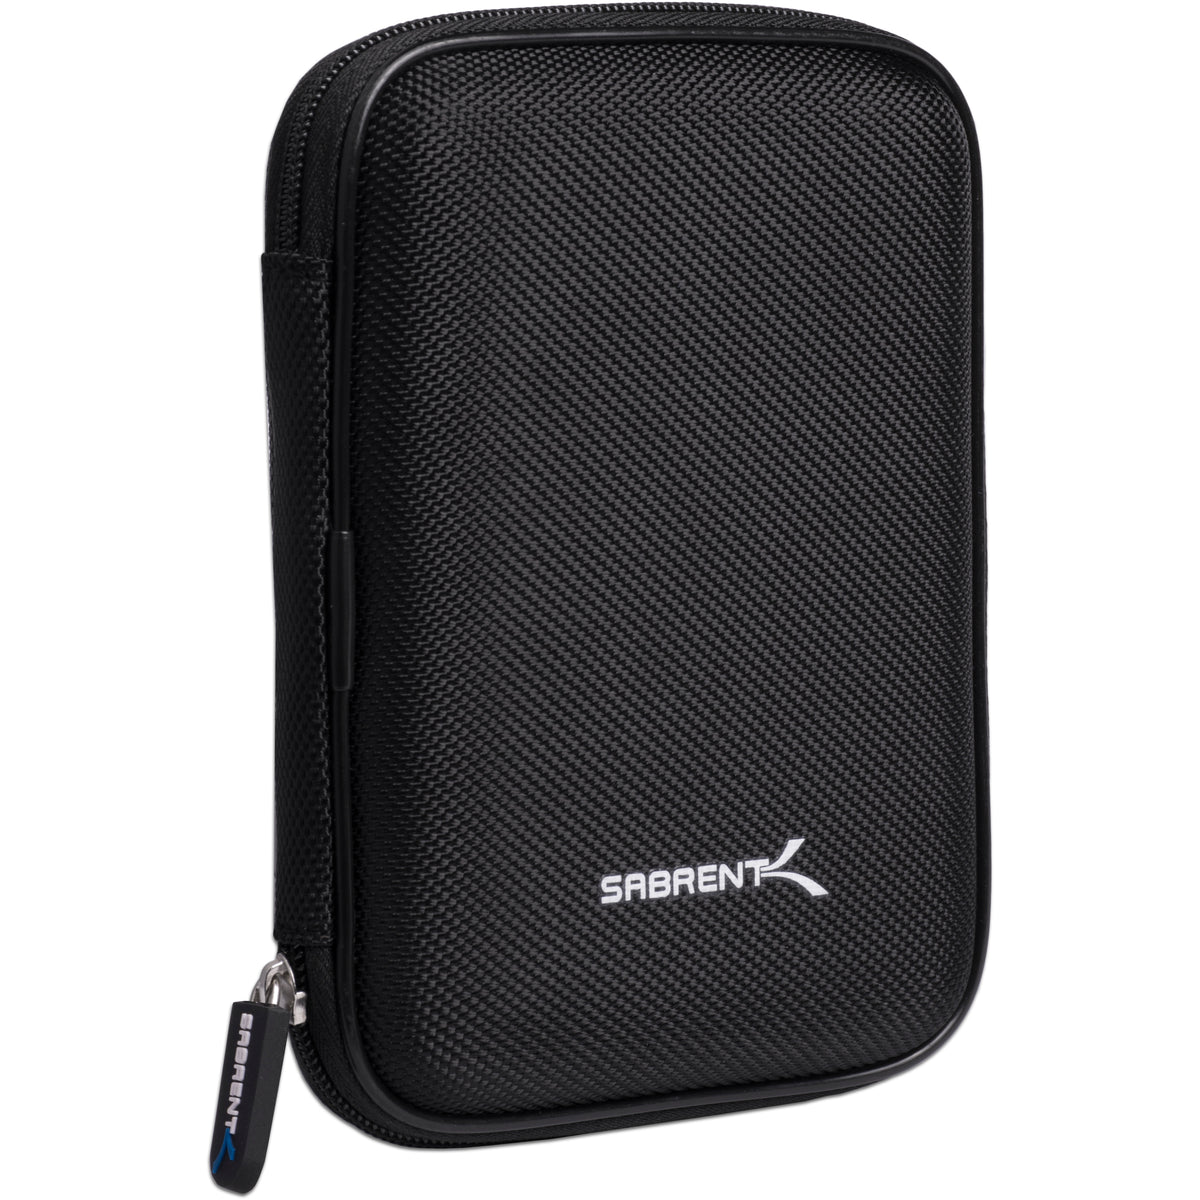 Hard Carrying Case for External 2.5&quot; Hard Drive